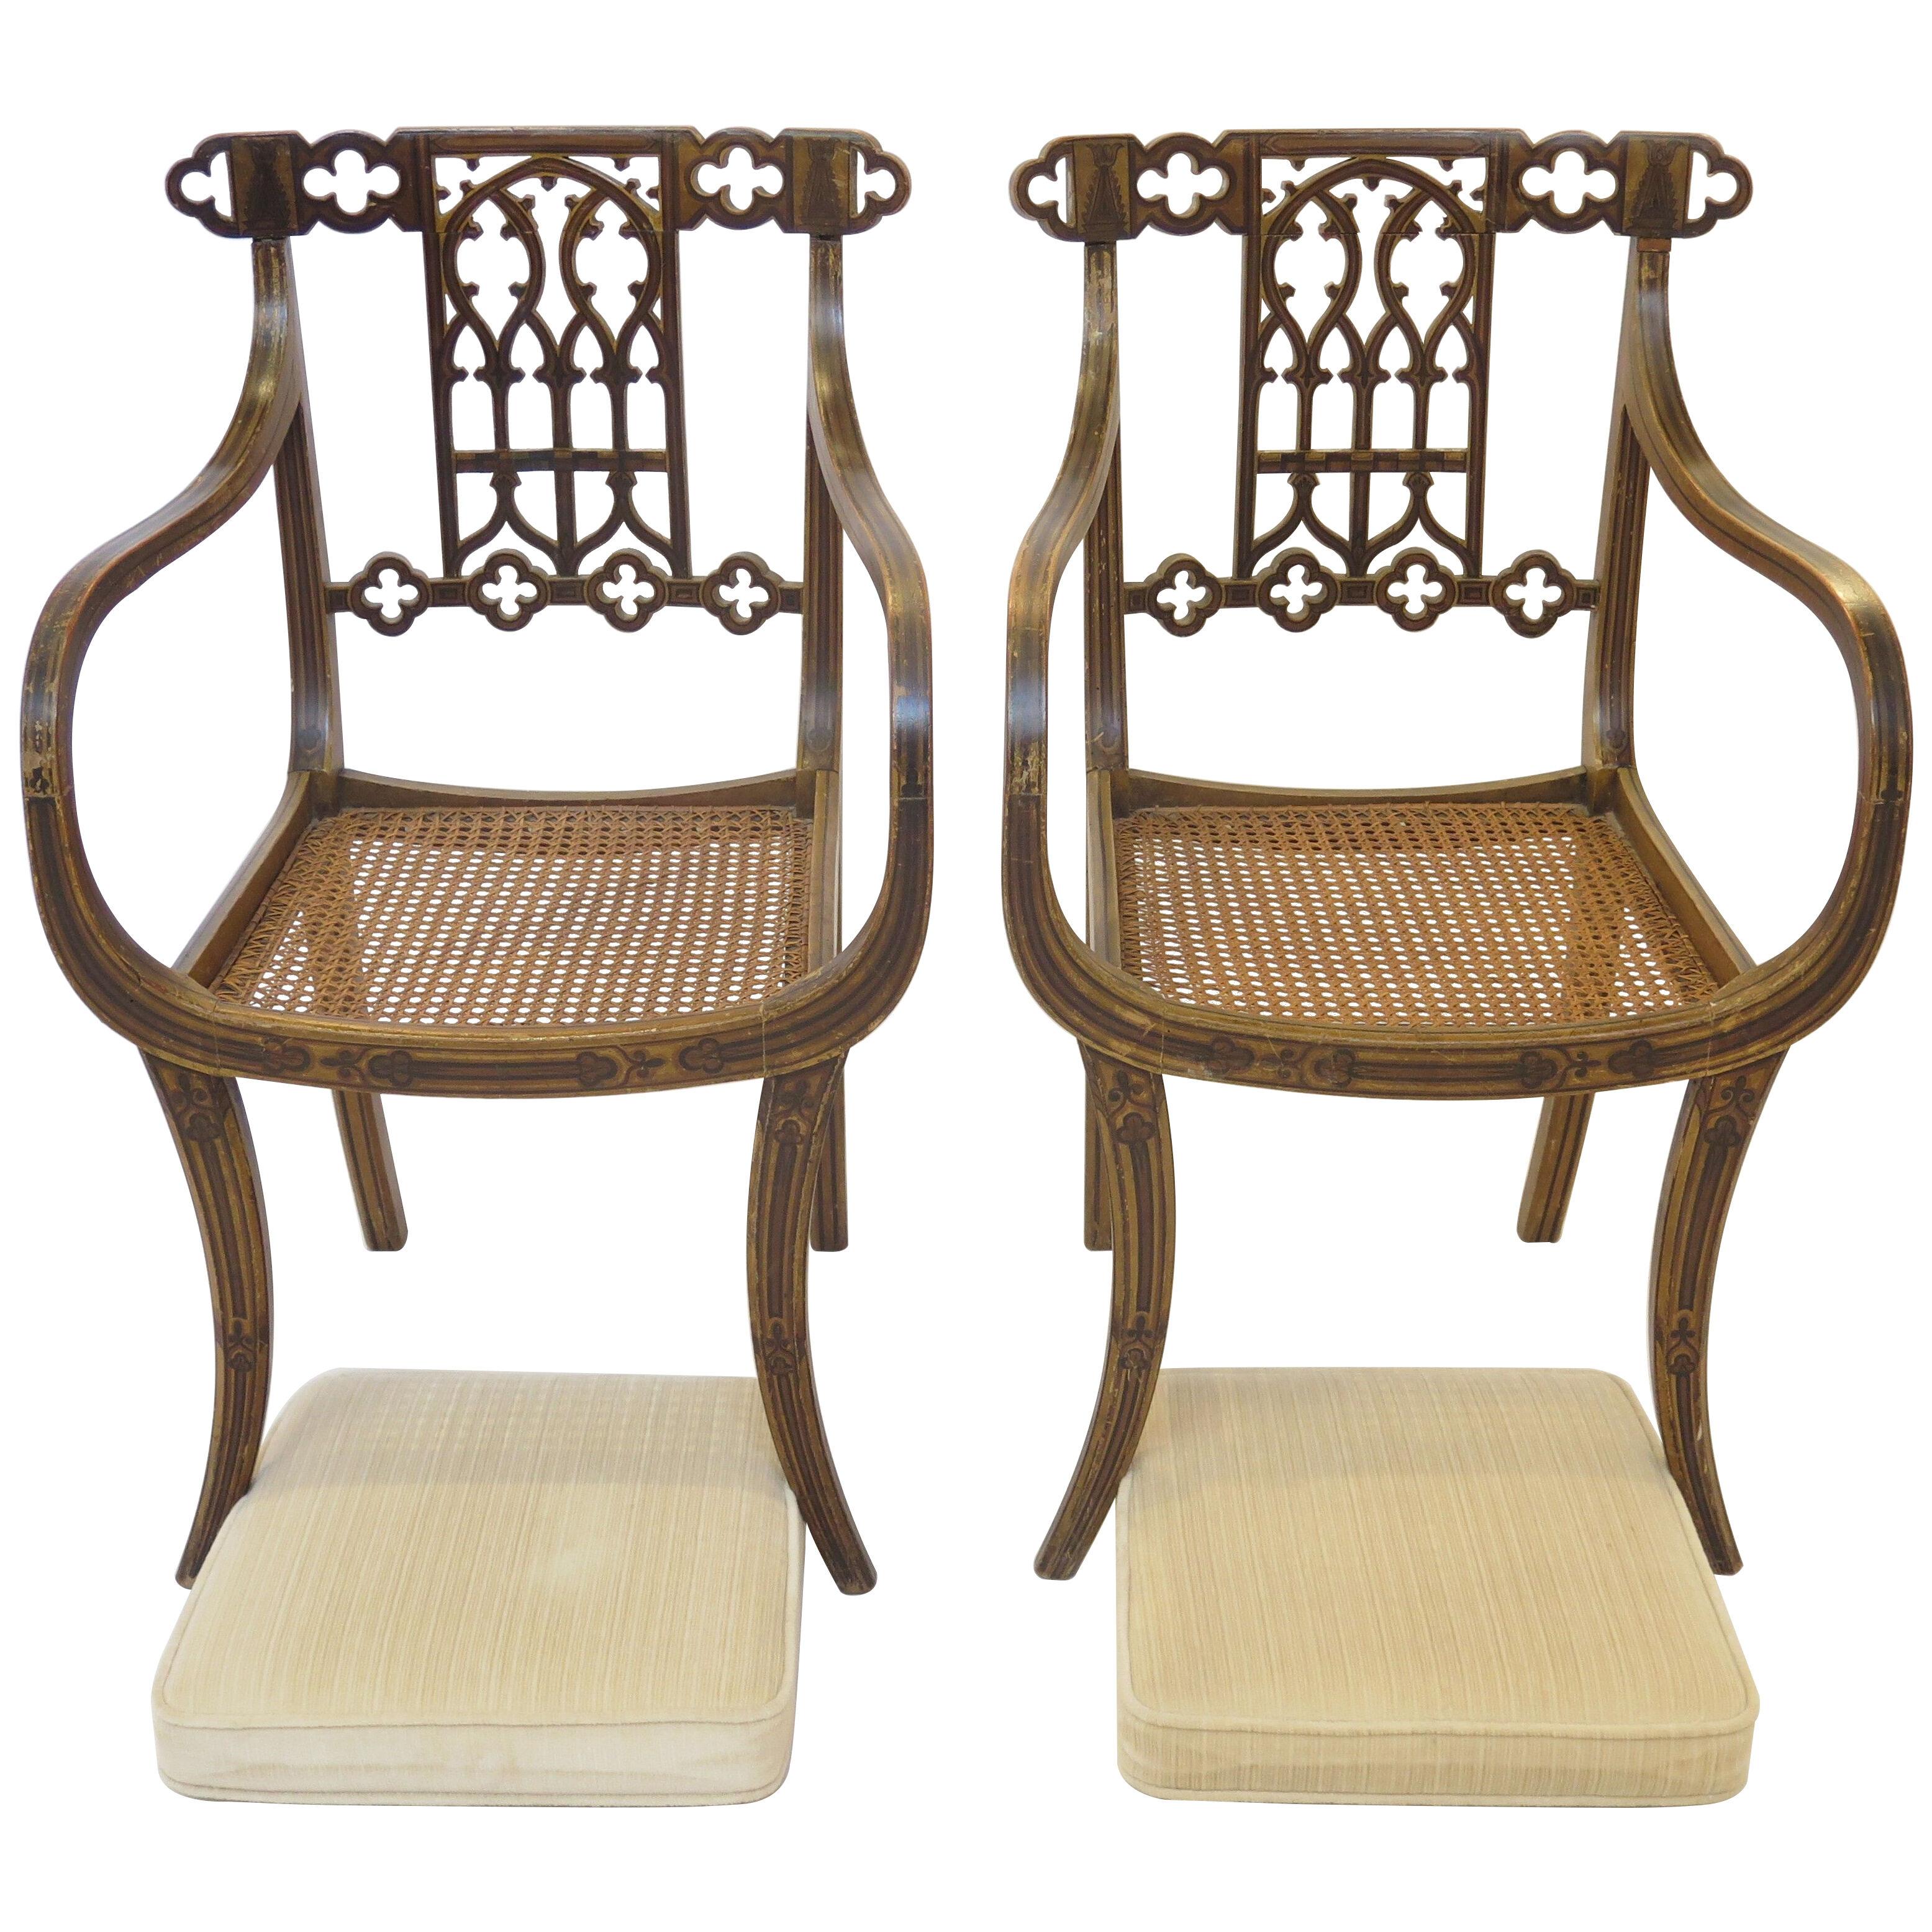 Set of Four (4) Regency Faux-Painted Arm Chairs in the Gothic Taste